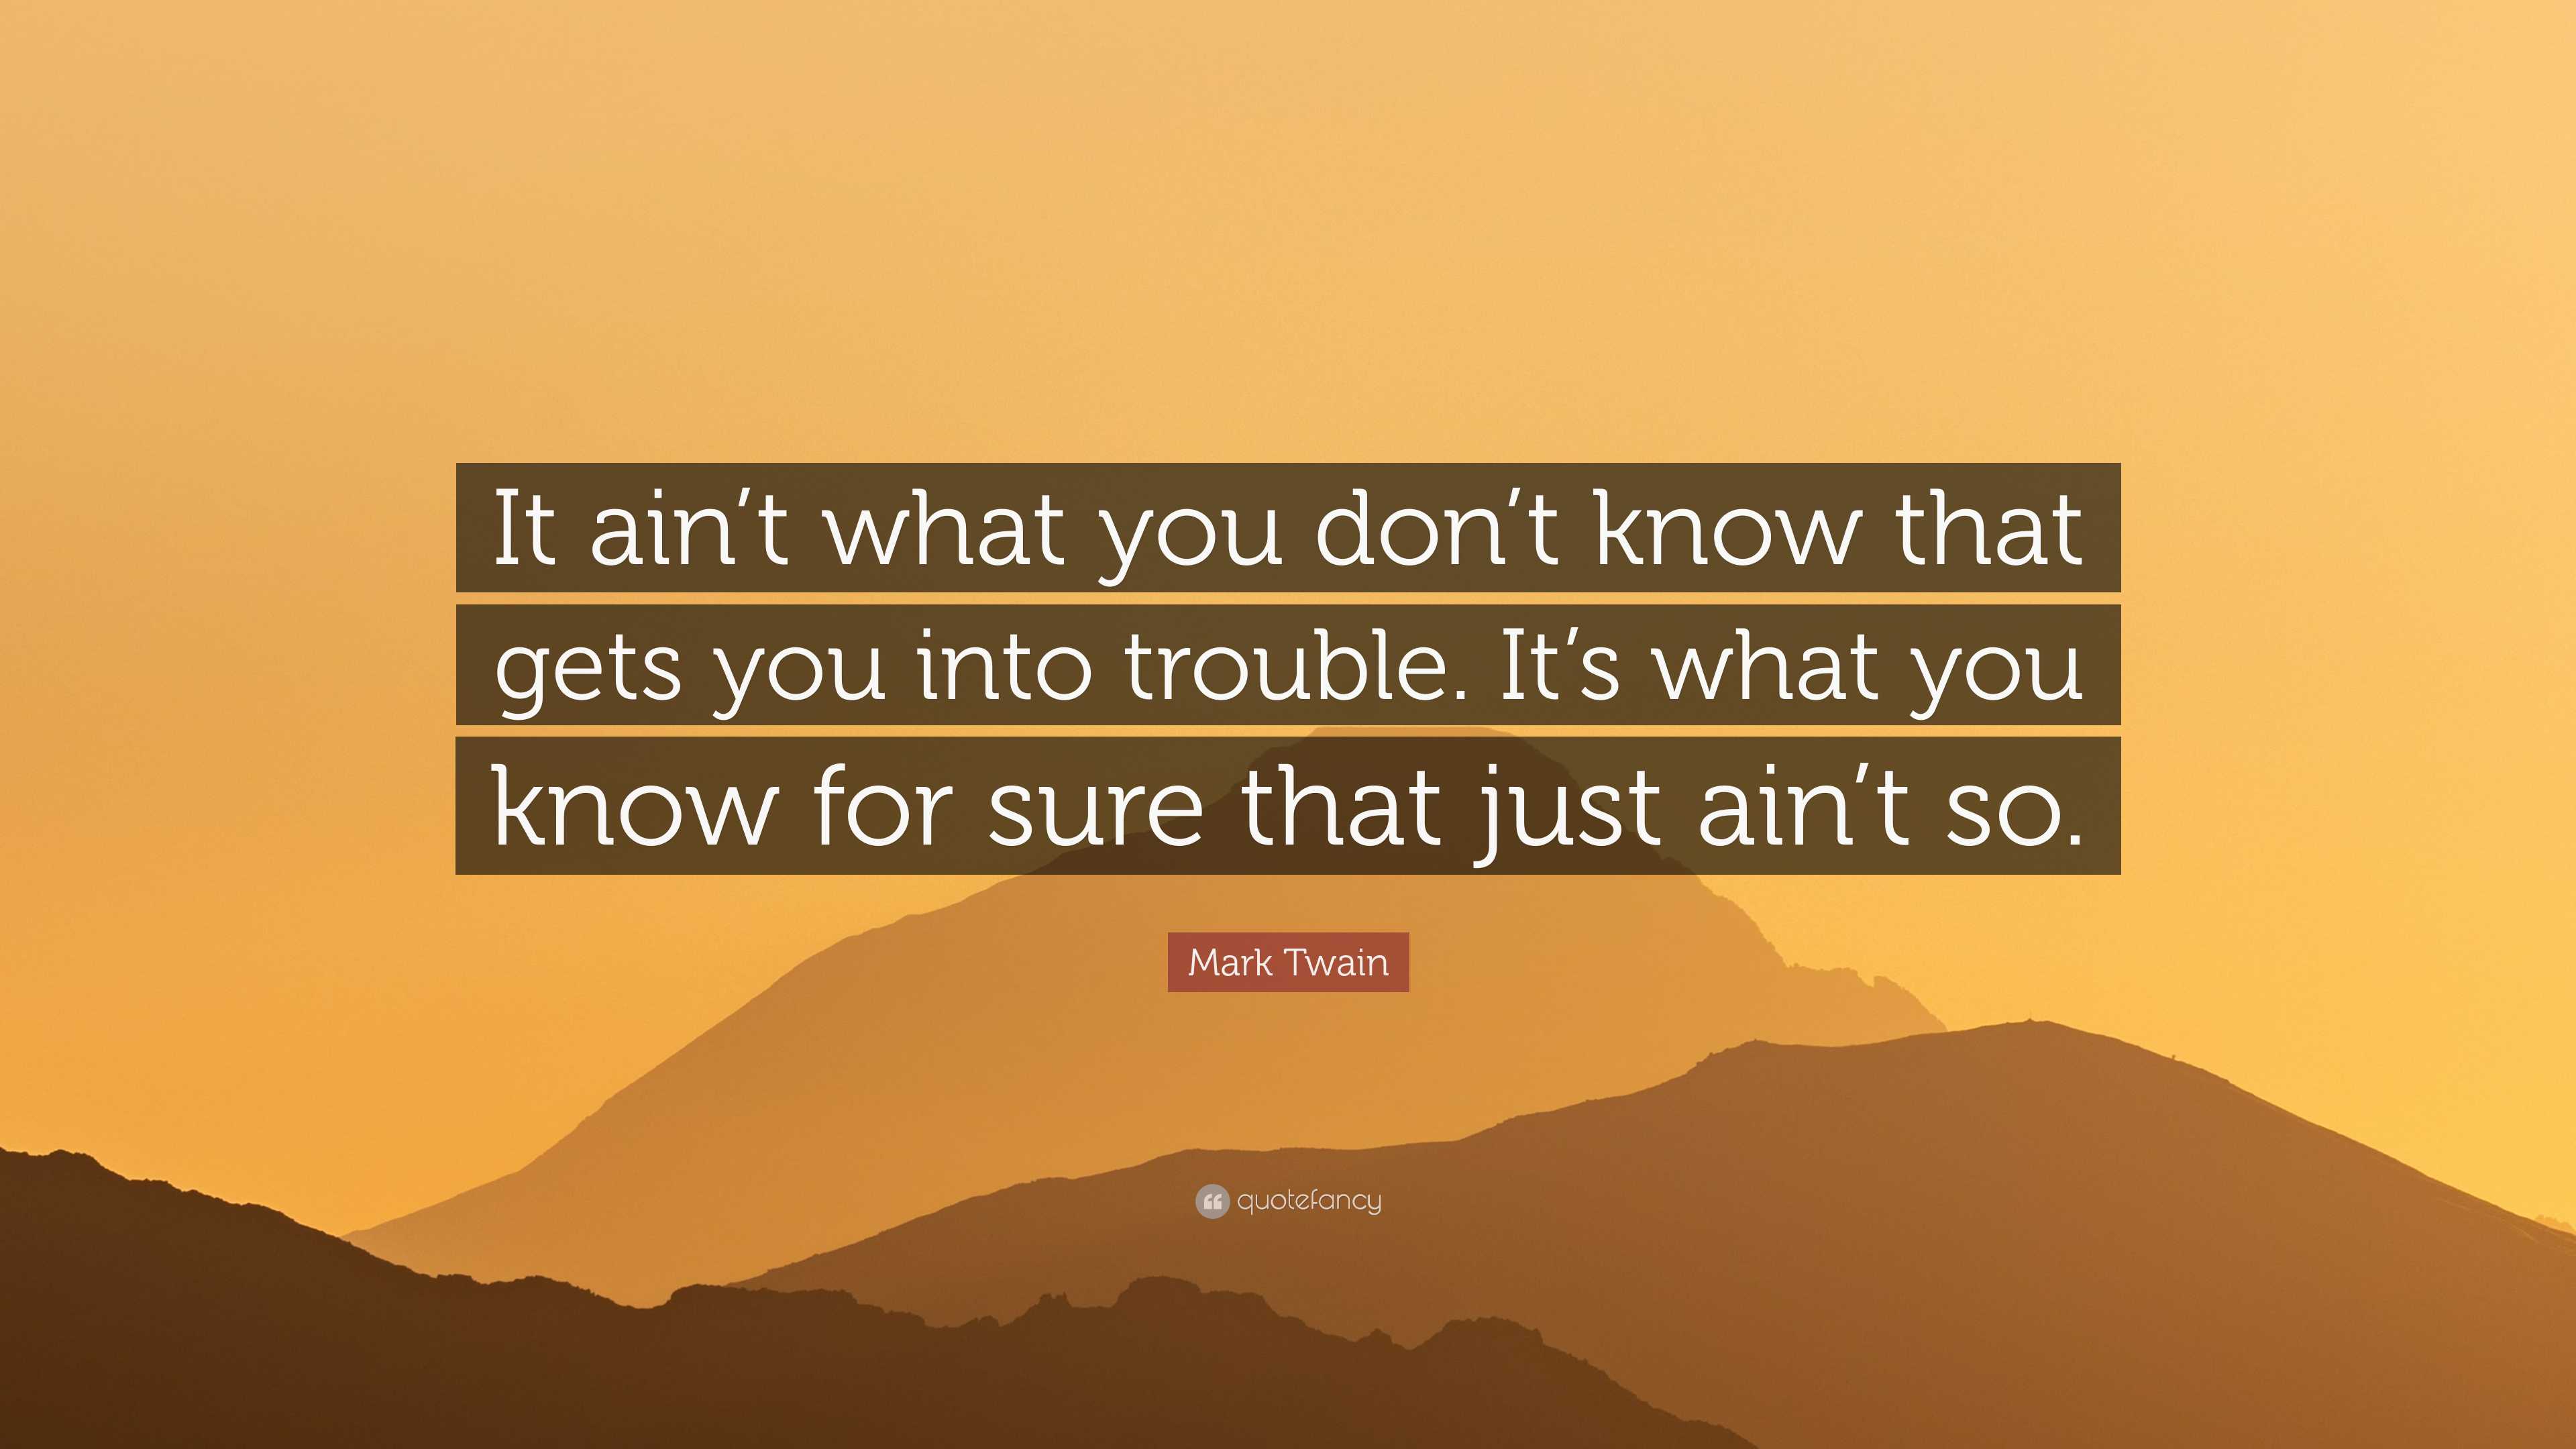 It ain't what you don't know that gets you into trouble.. - Think  Independent